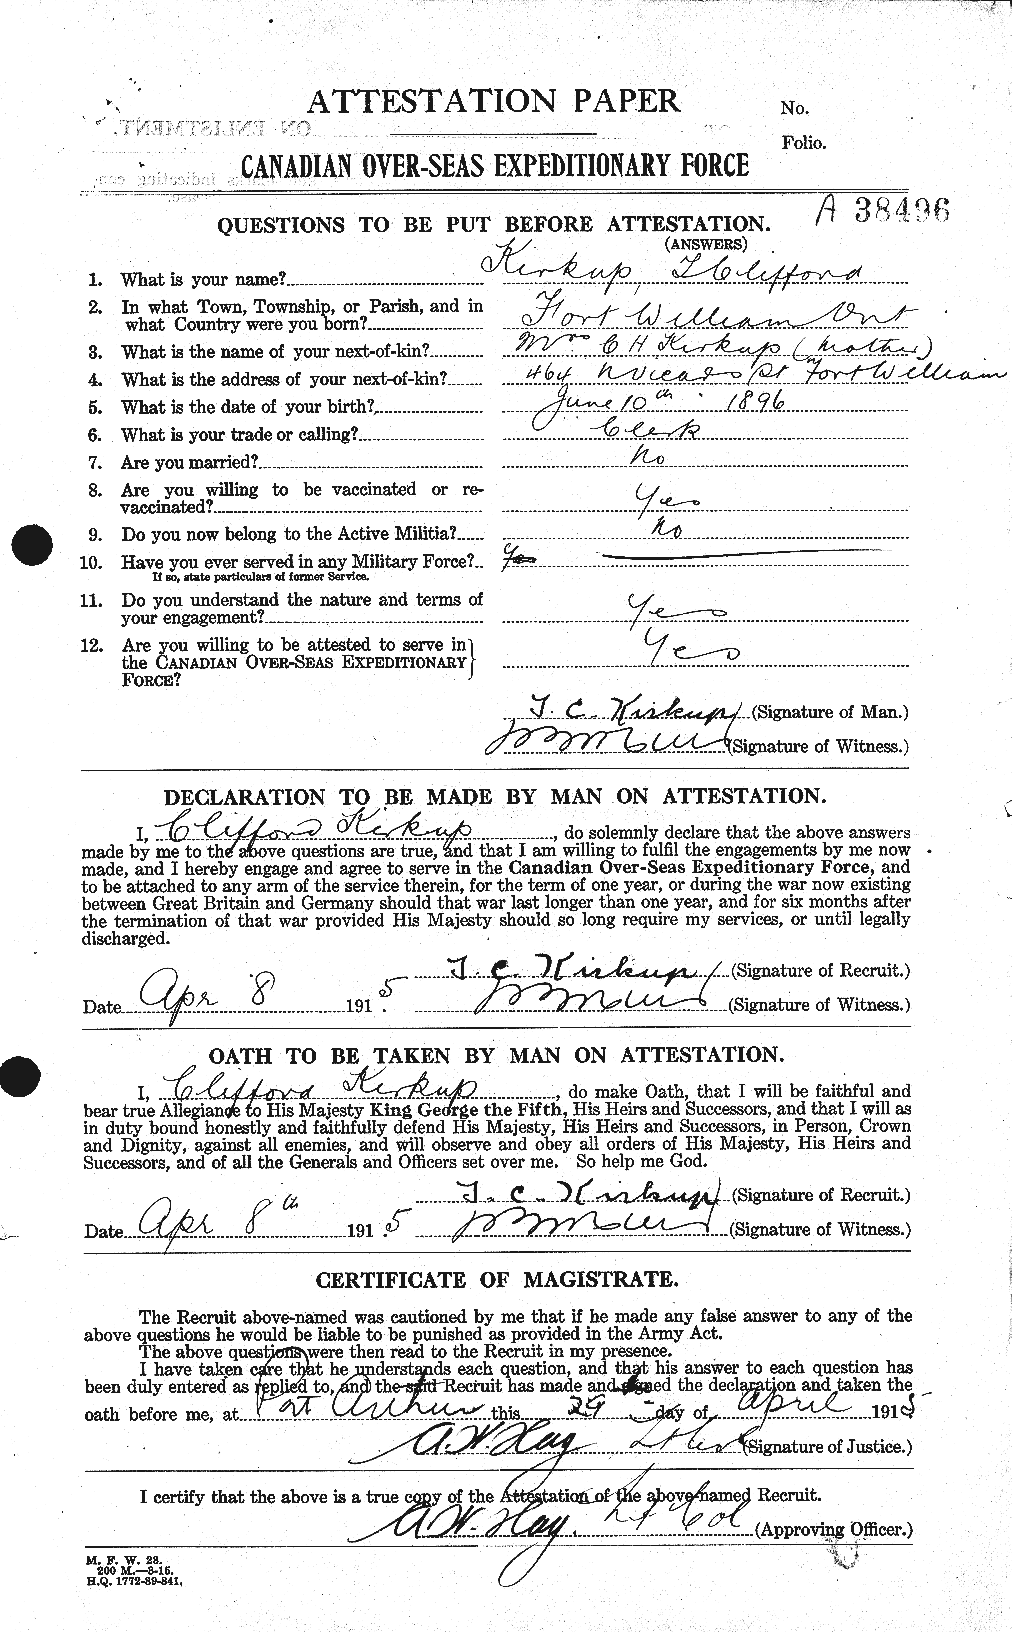 Personnel Records of the First World War - CEF 436156a